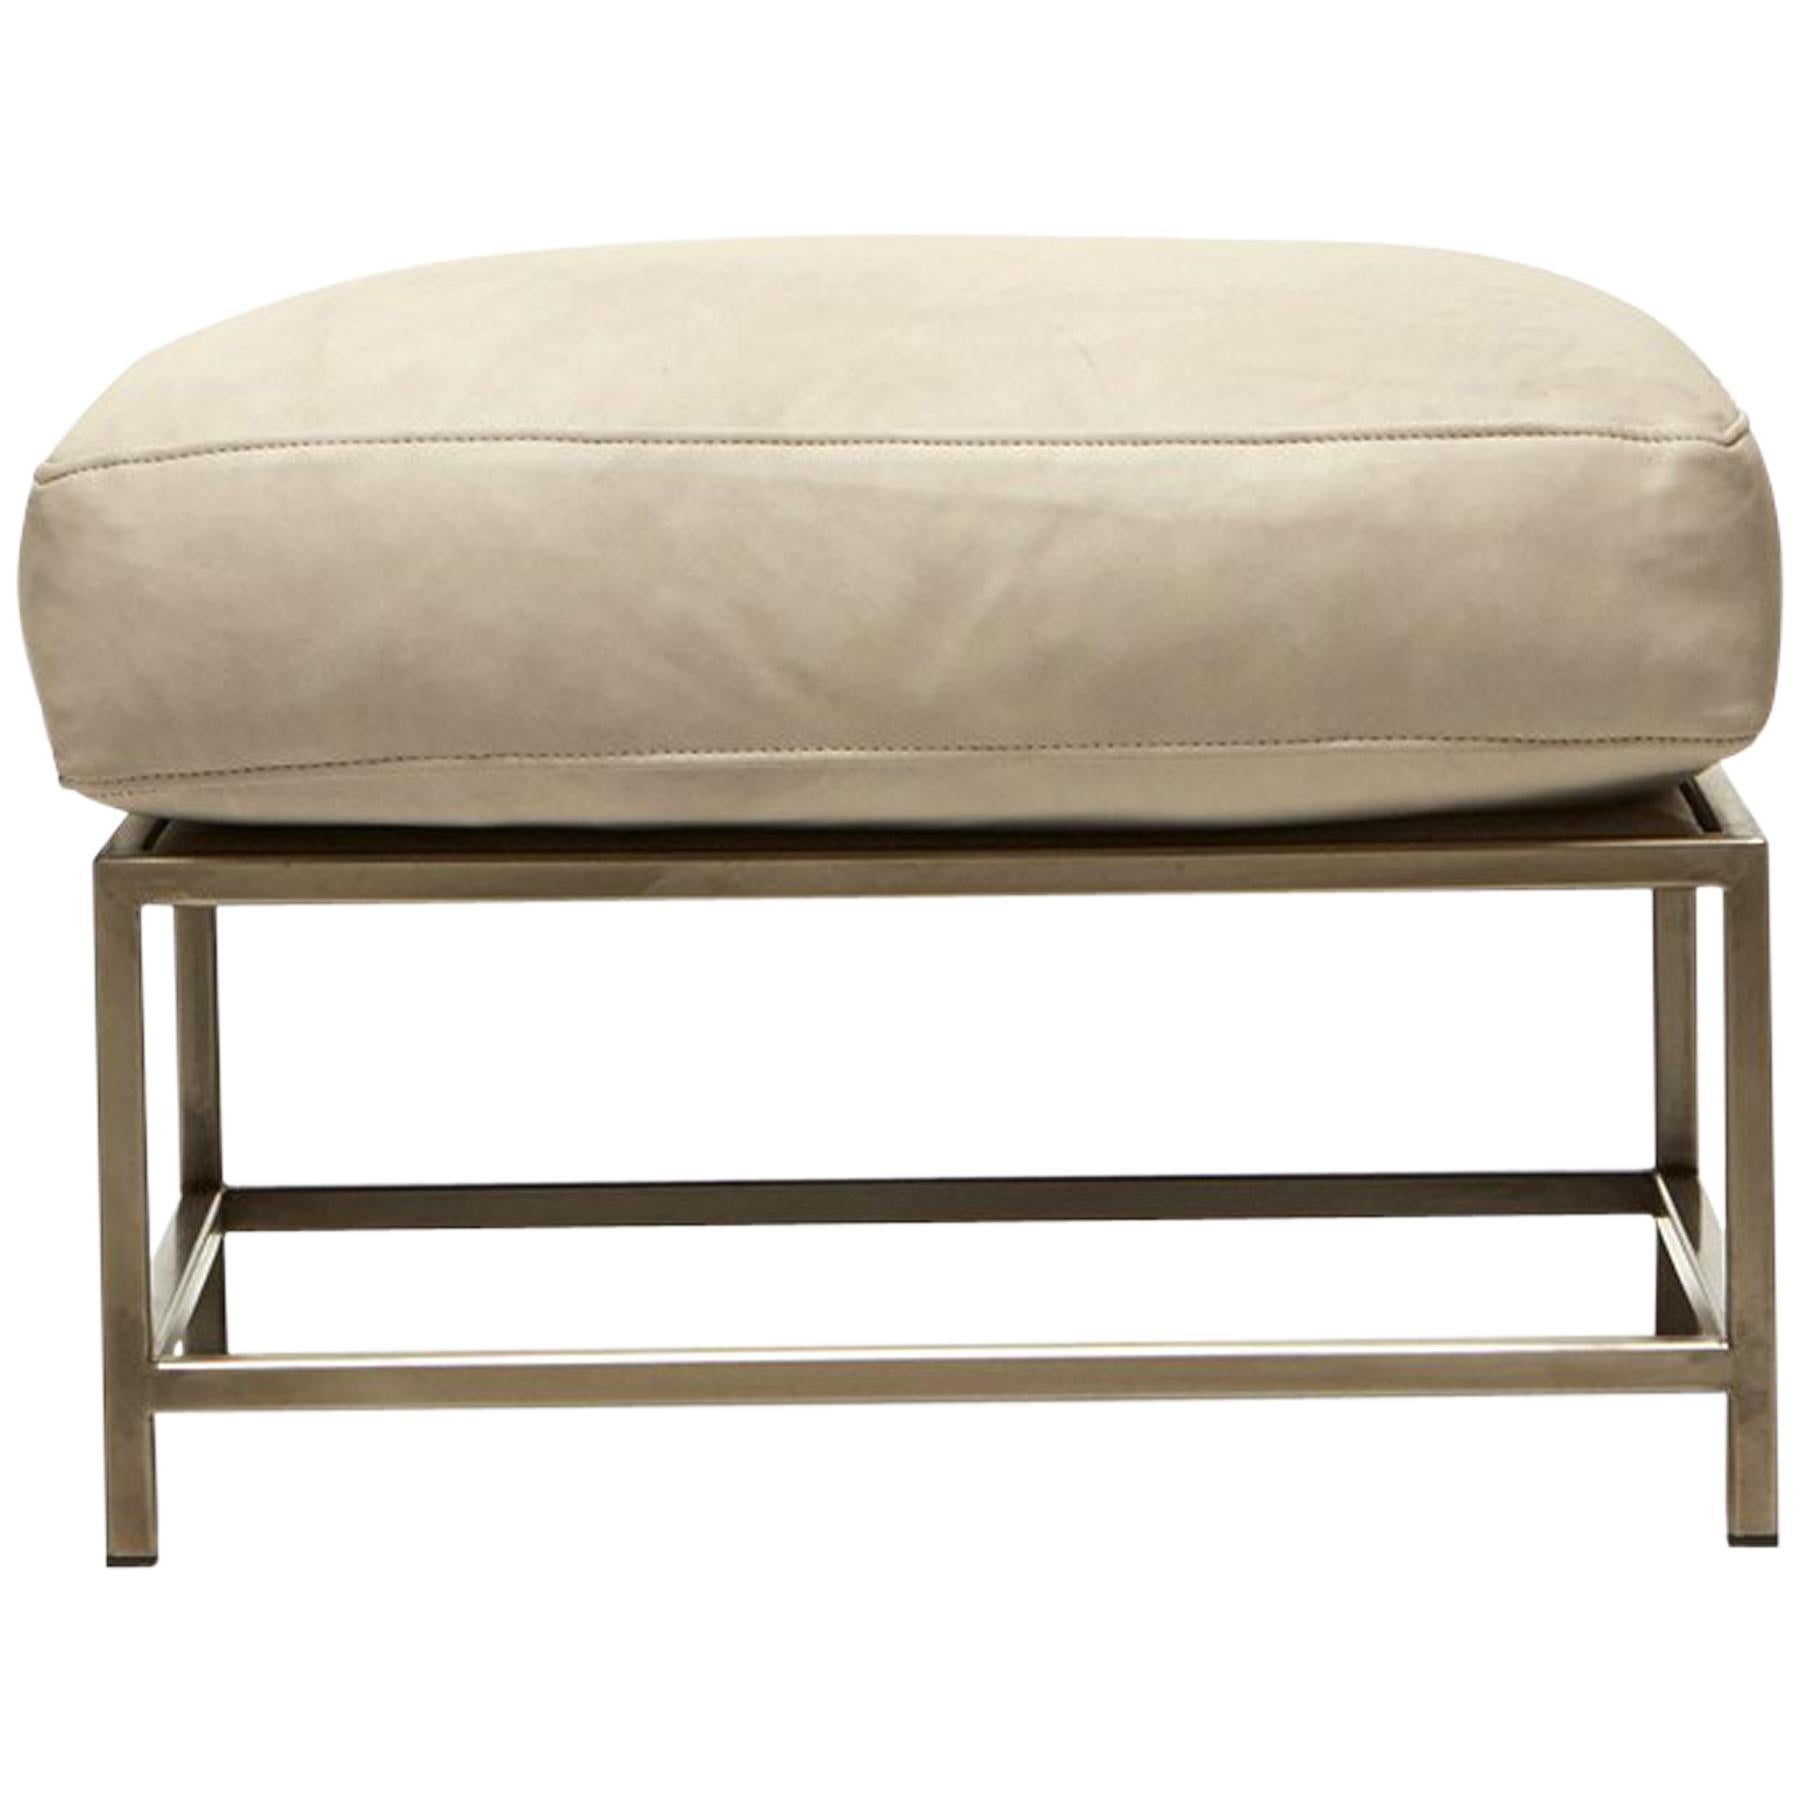 Stone Leather and Antique Nickel Ottoman For Sale